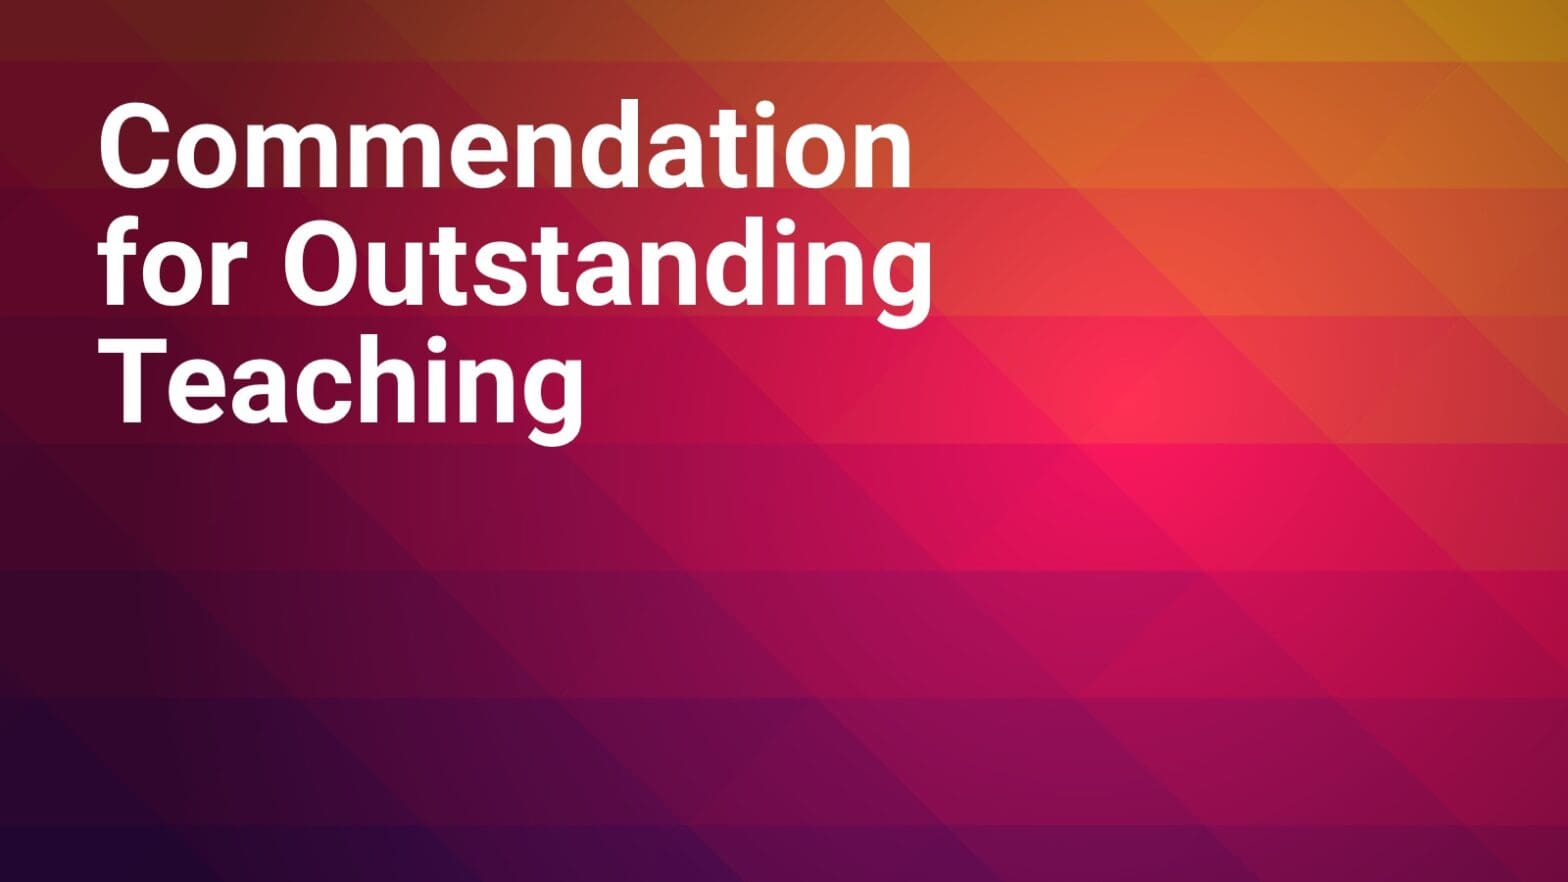 Graphic with text "Commendation for Outstanding Teaching".